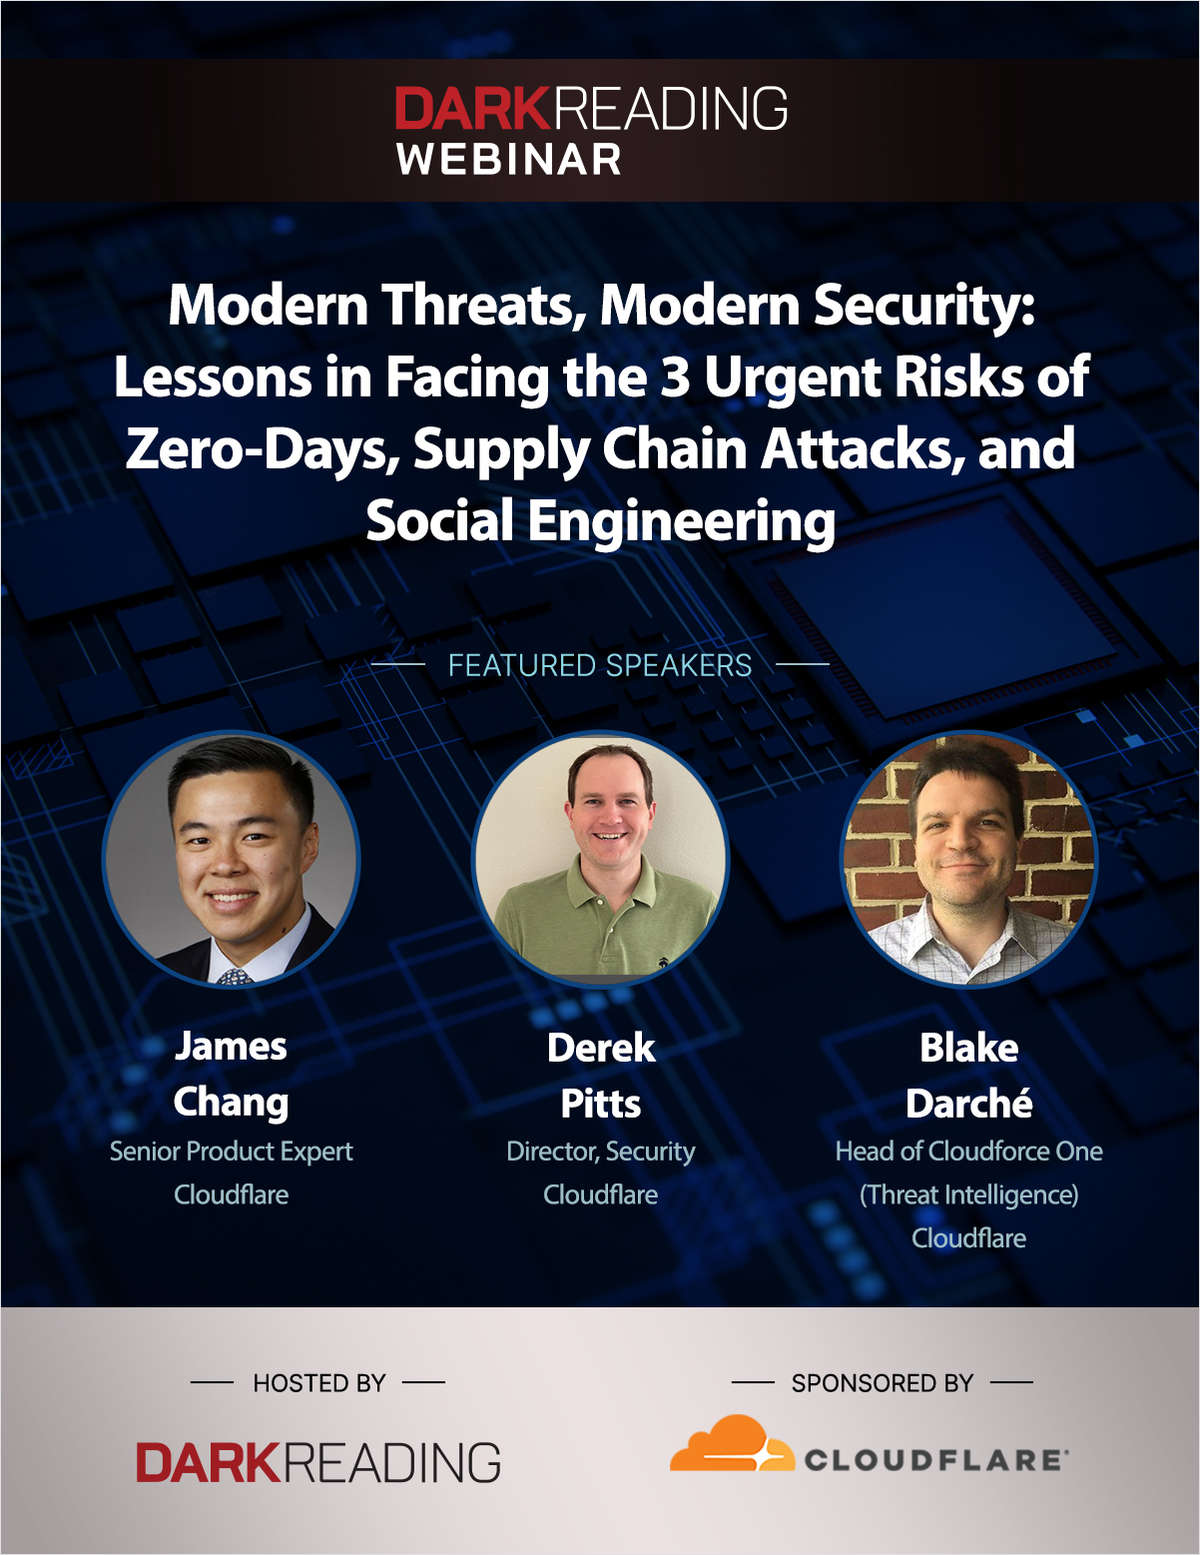 Modern Threats, Modern Security: Lessons in Facing the 3 Urgent Risks of Zero-Days, Supply Chain Attacks, and Social Engineering